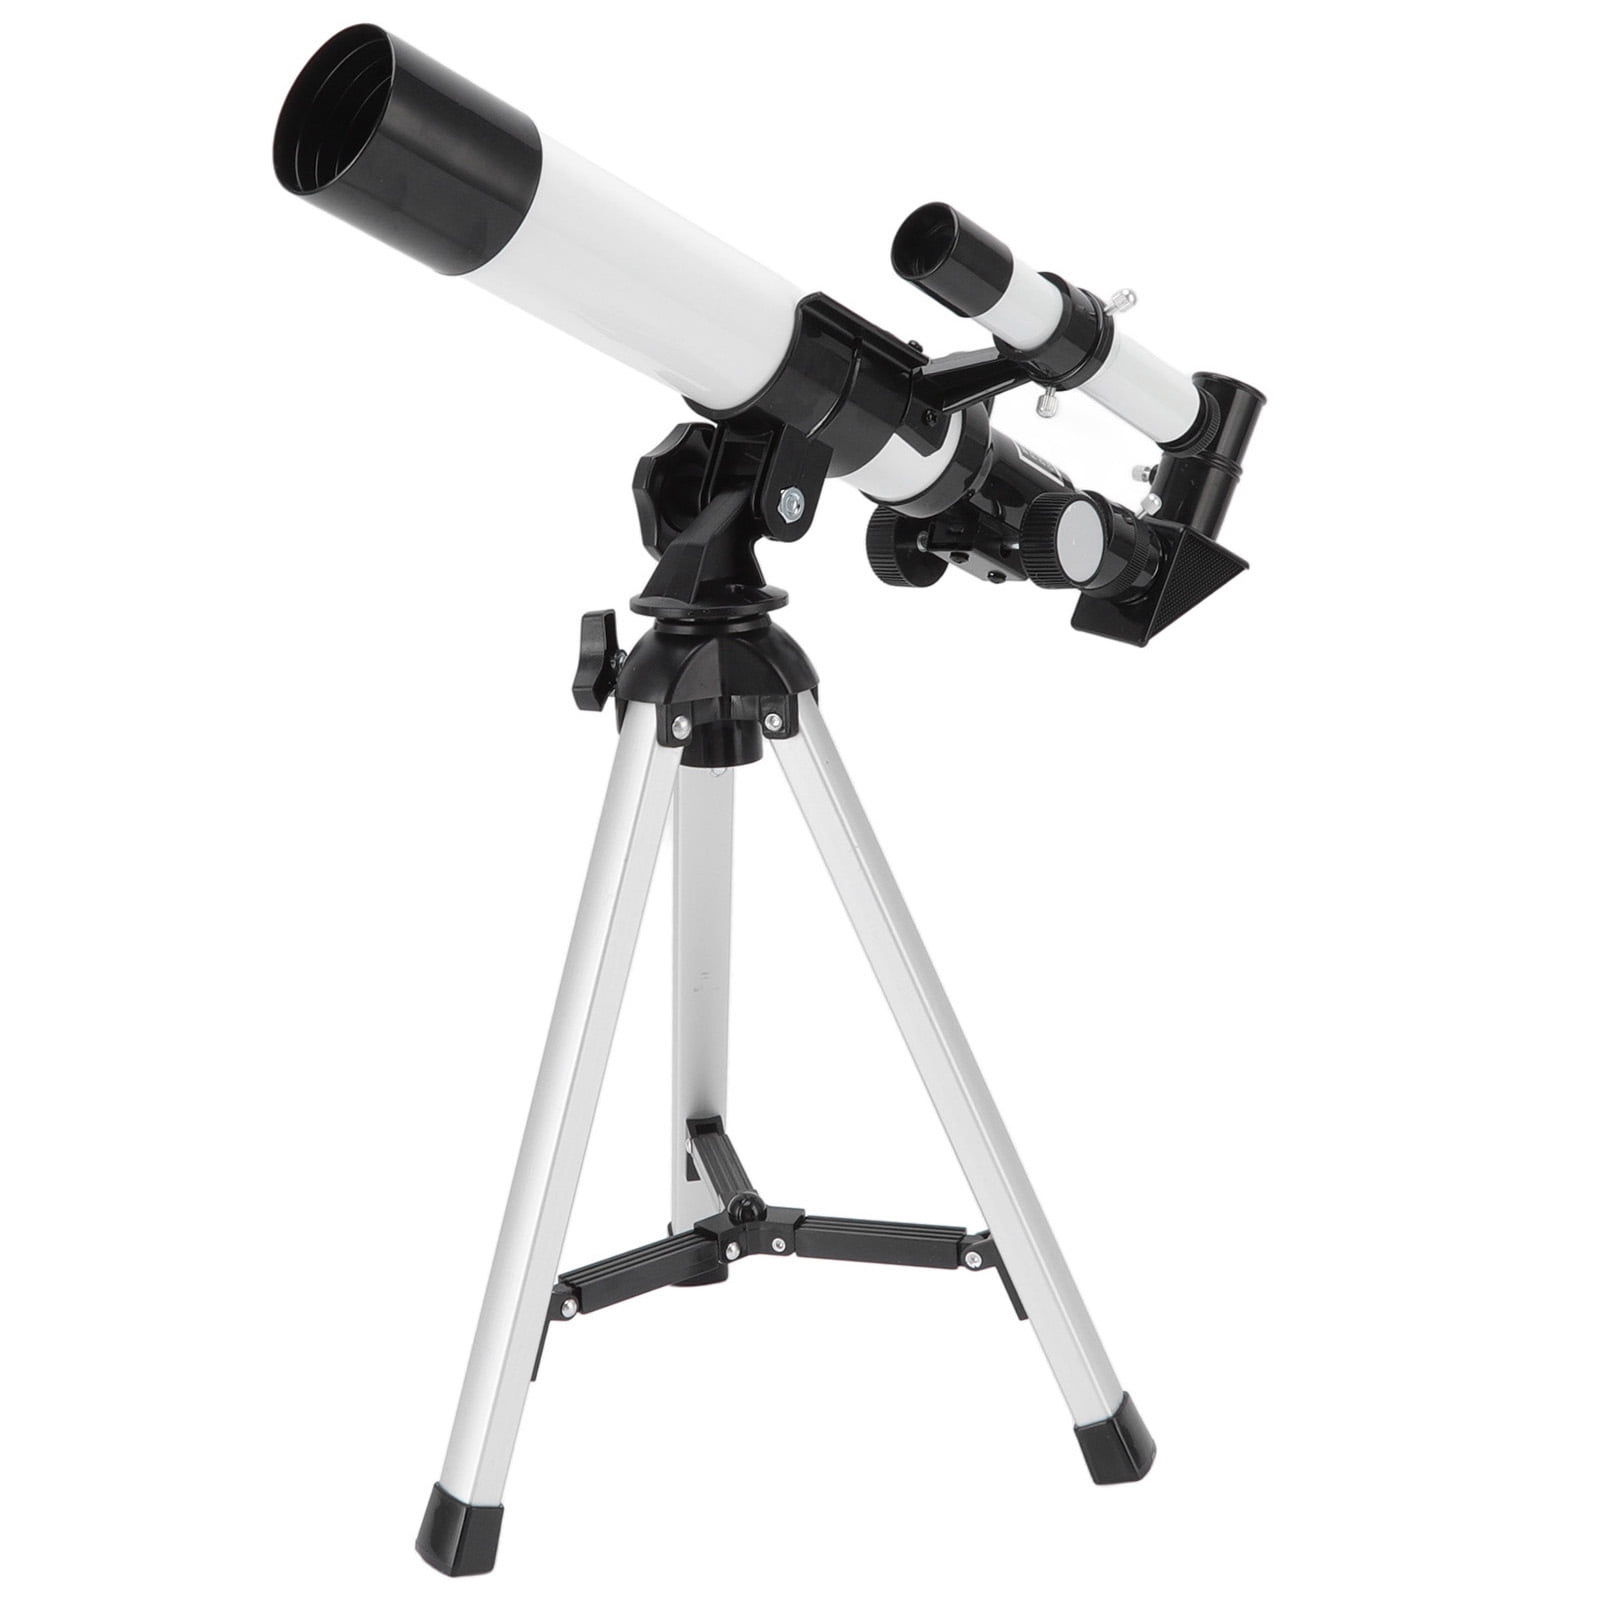 Pisexur Astronomical Telescope for Beginners for Stargazing in Wild High Magnification Astronomical Telescope Portable Small Refractor Telescope Stargazing Telescope with 400mm Focal Length 